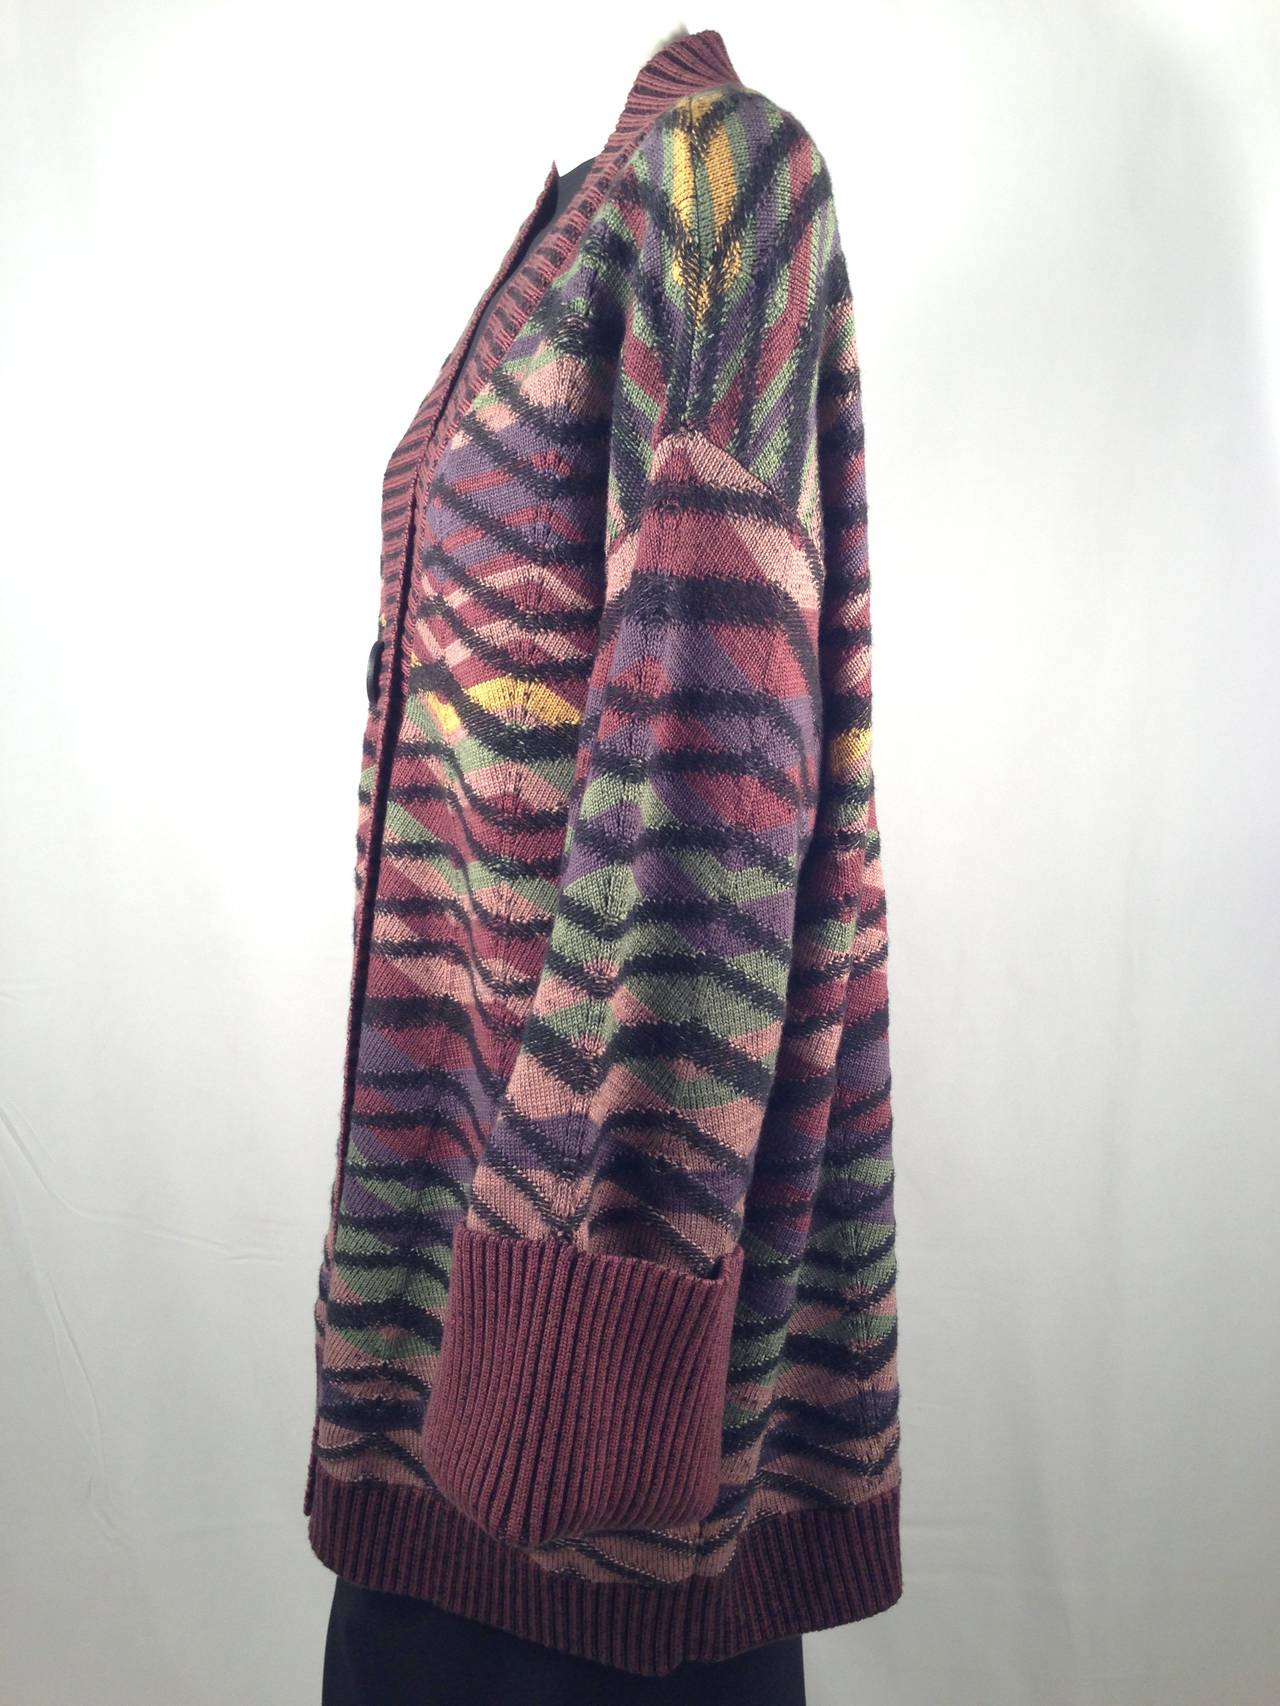 Vintage 1981 Missoni 100% Merino Wool Sweater Coat In New Condition For Sale In Palm Beach, FL